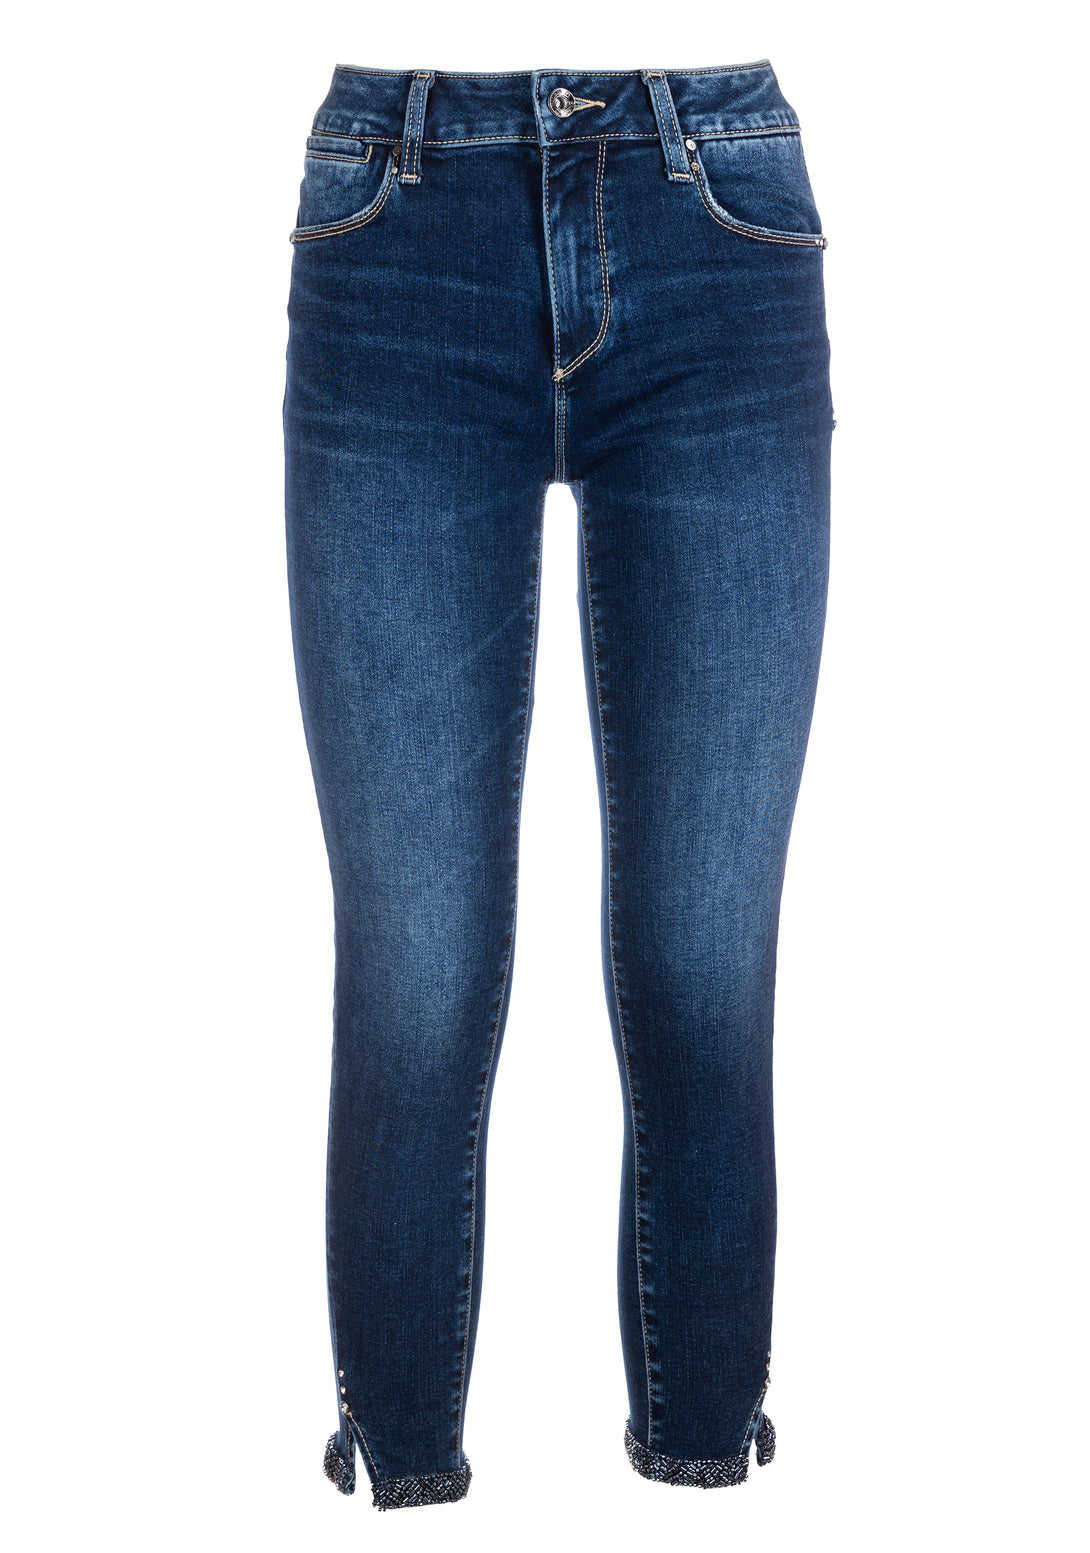 Jeans slim fit cropped with push up effect made in denim with middle wash and stone Fracomina FP23WV9002D40193-117-1